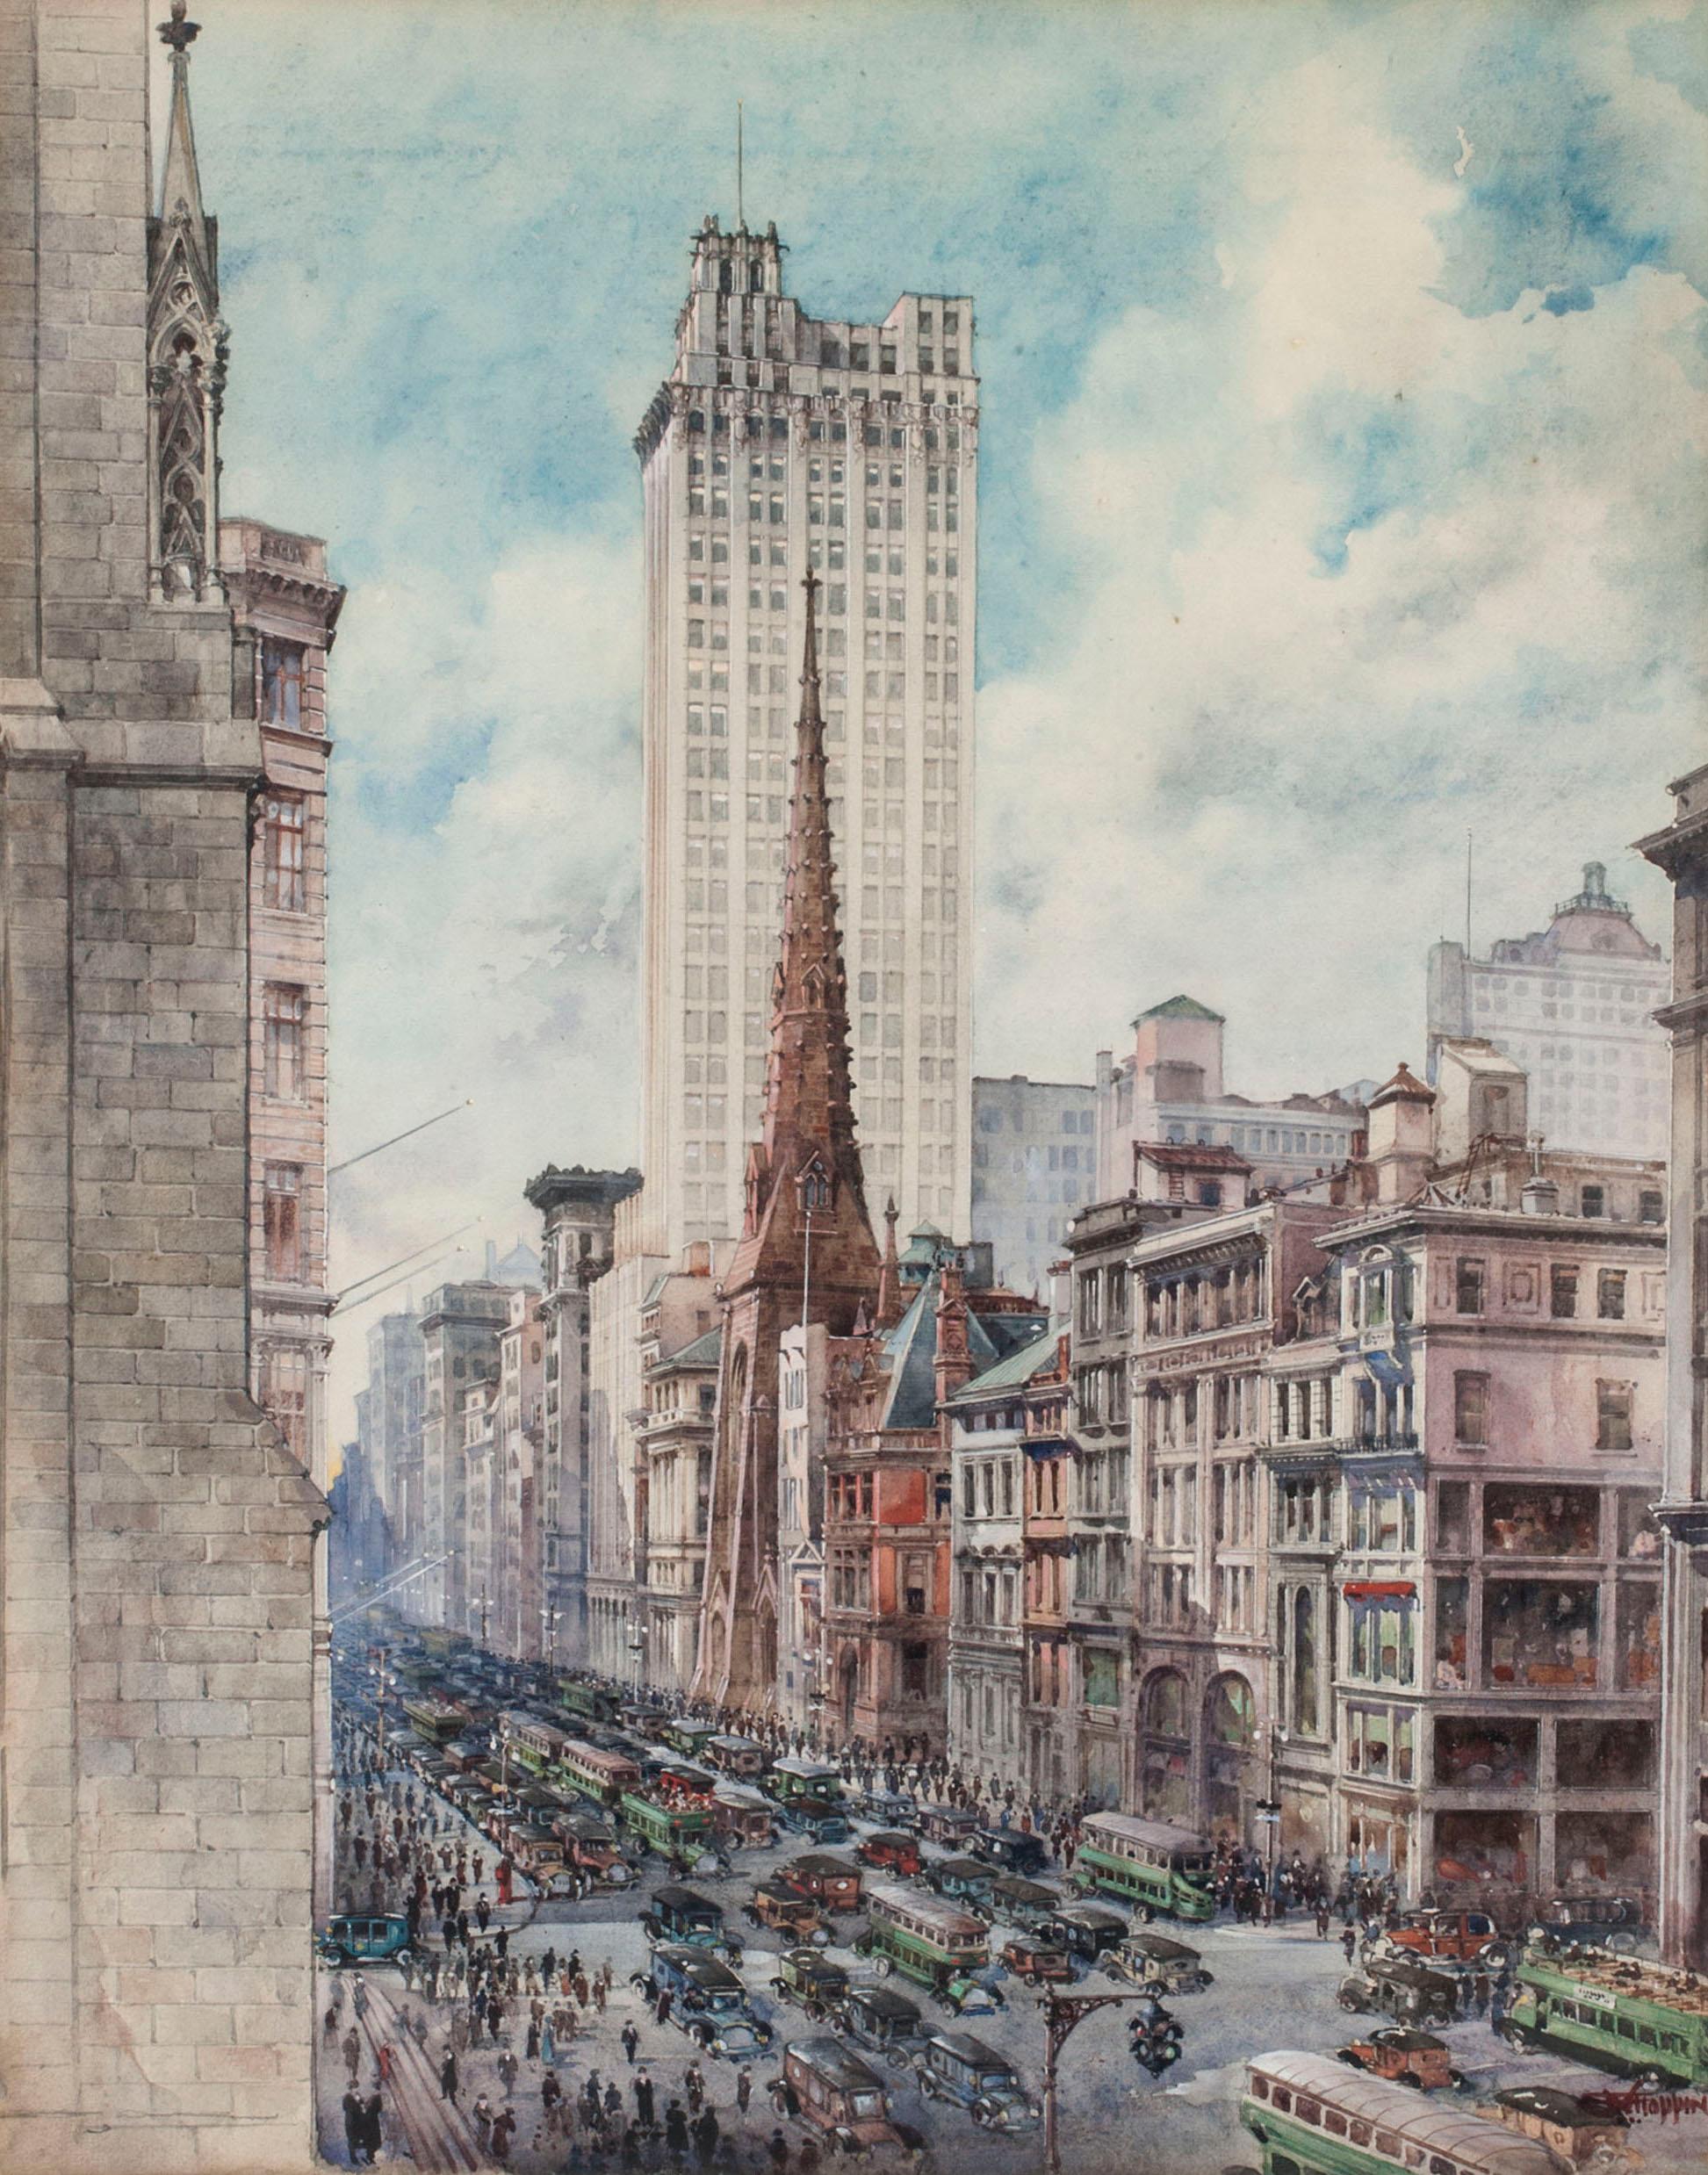 Street View, Fifth Avenue, Manhattan, a watercolor painting by Charles Hoppin (active 20th century)

Charles Hoppin (active 20th century)
Street View, Fifth Avenue, Manhattan
Watercolor on paper
20 x 16 inches
Signed lower right


